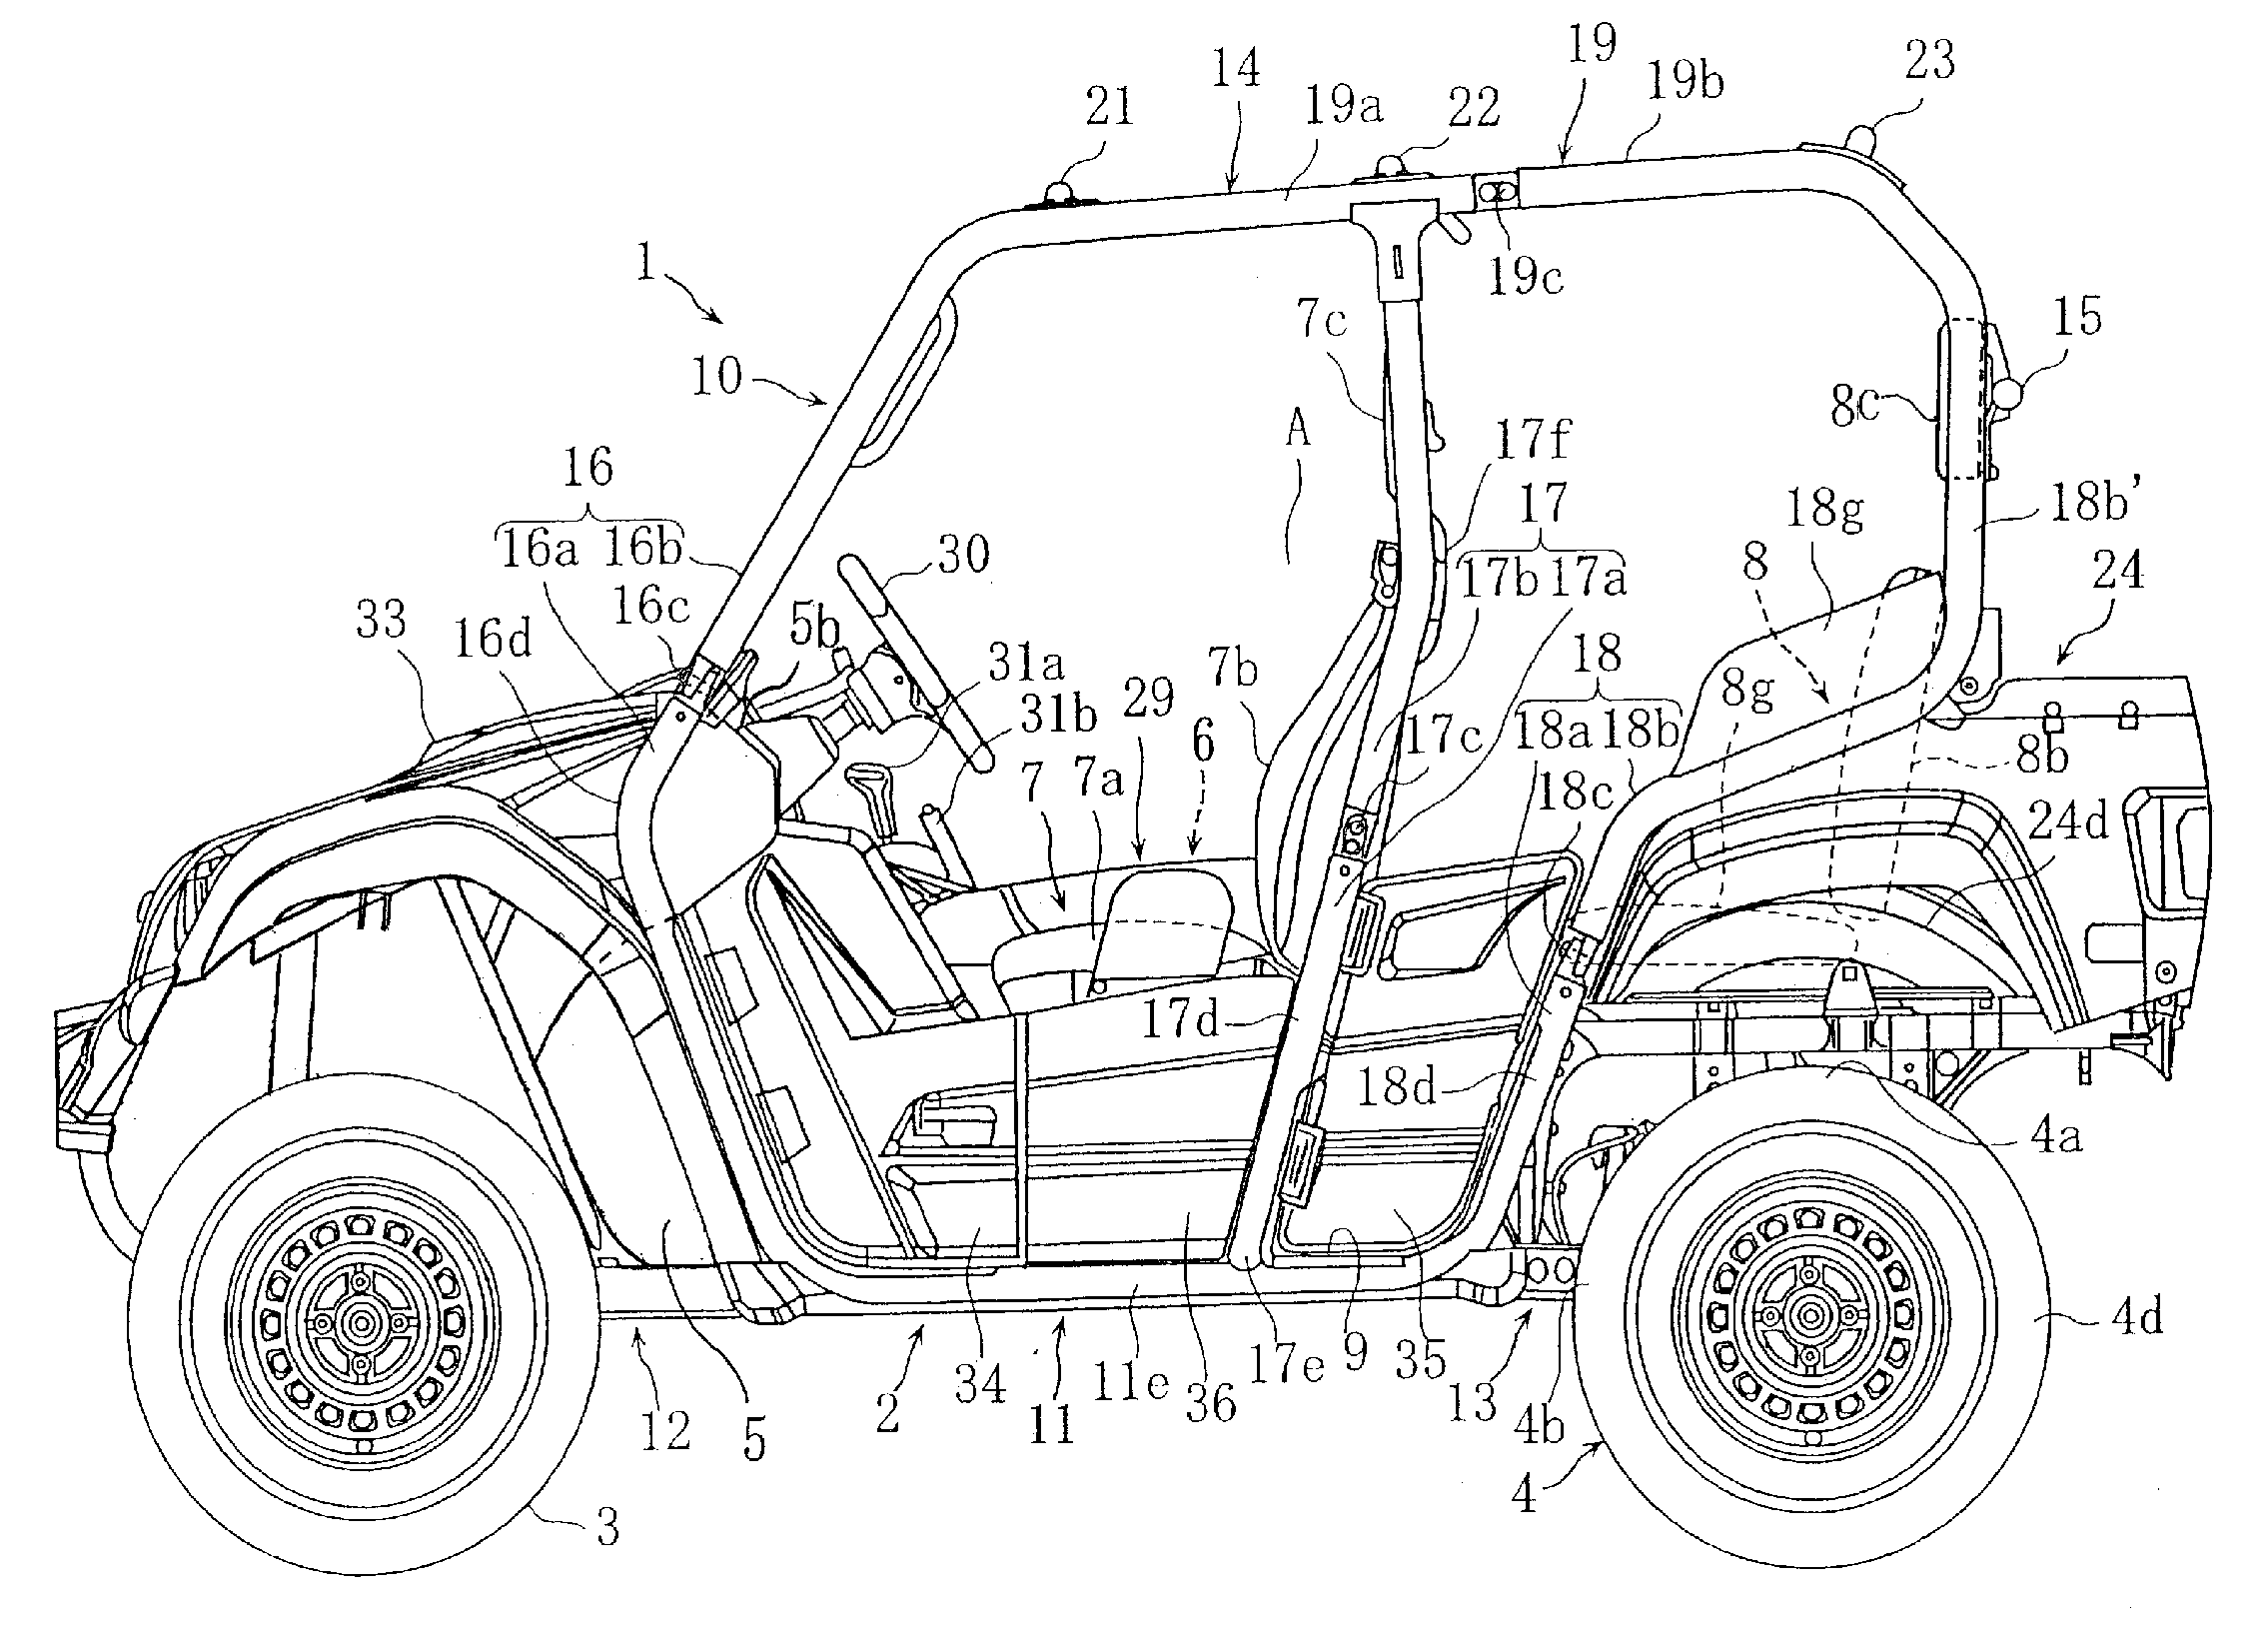 Design for an utility vehicle